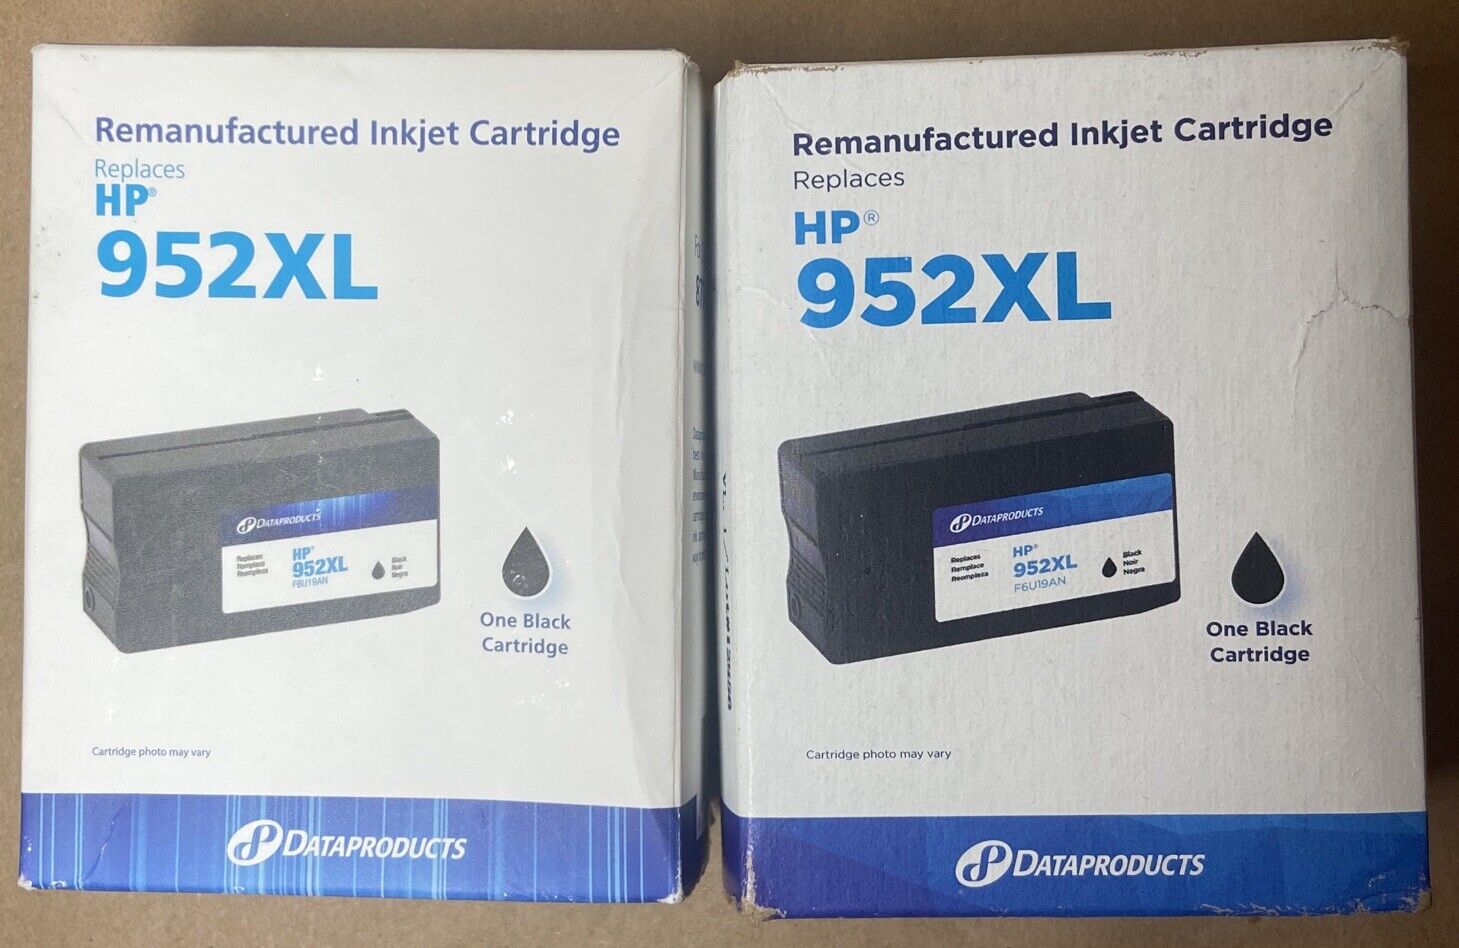 2 PACK Dataproducts High Yield Black Ink Cartridge Compatible with HP 952XL